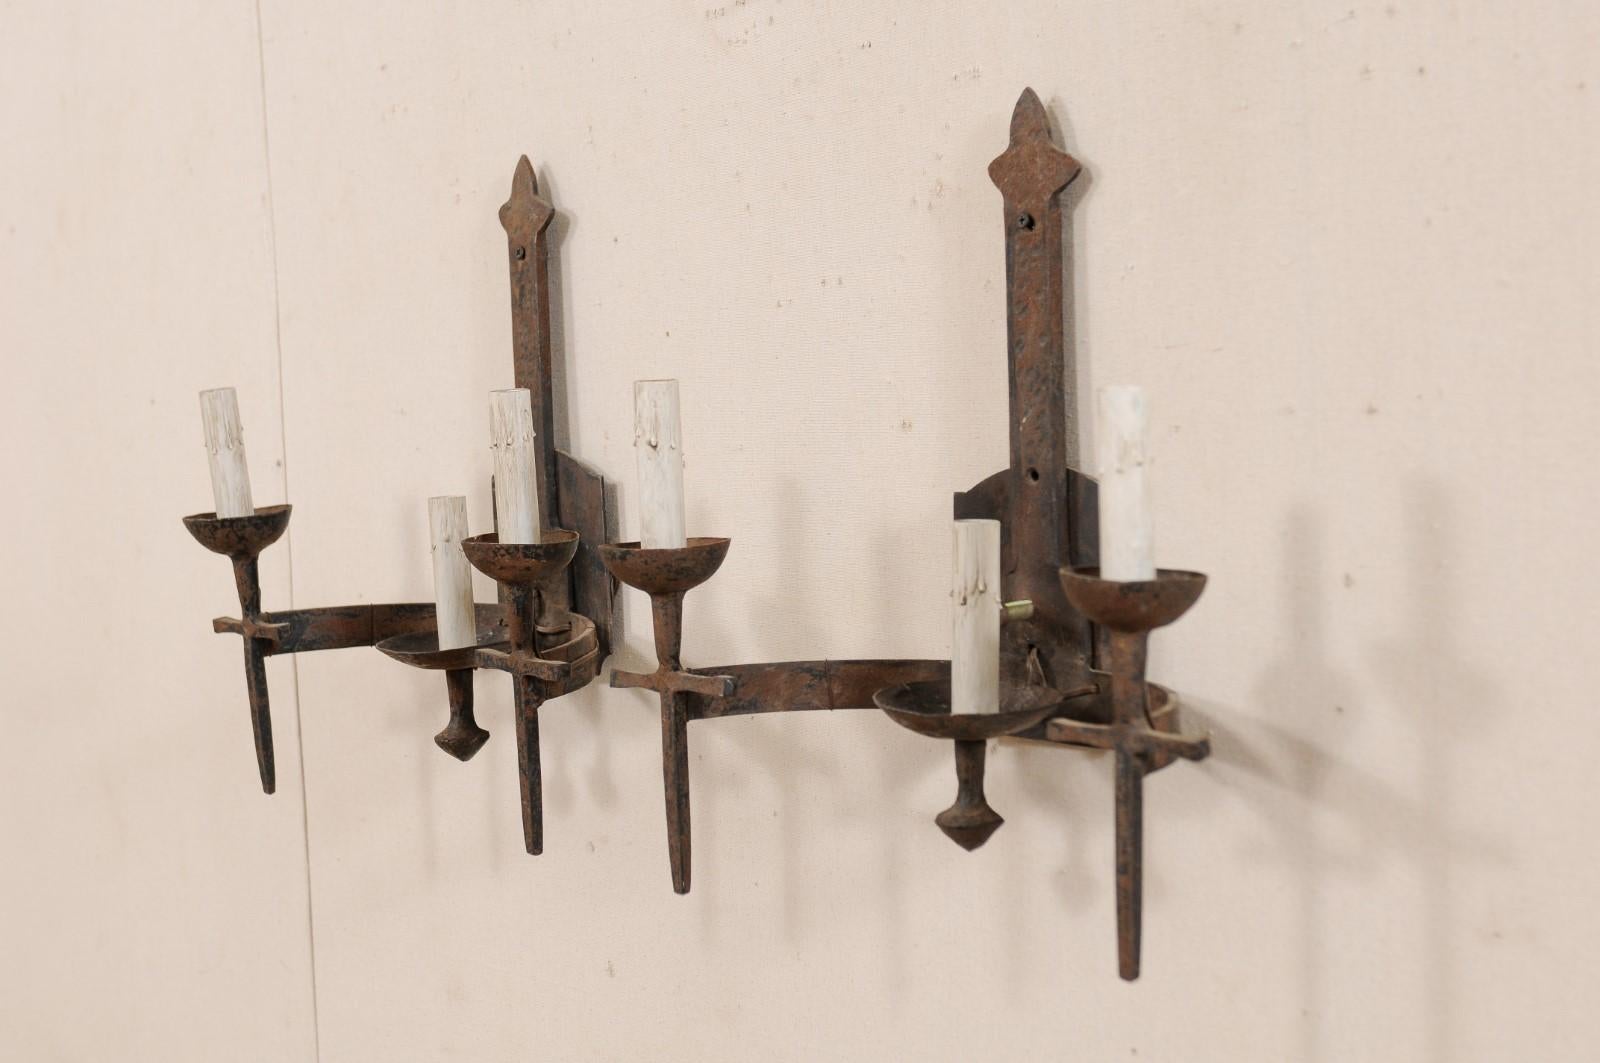 Pair of French Three-Light Midcentury Torch-Style Iron Sconces In Good Condition For Sale In Atlanta, GA